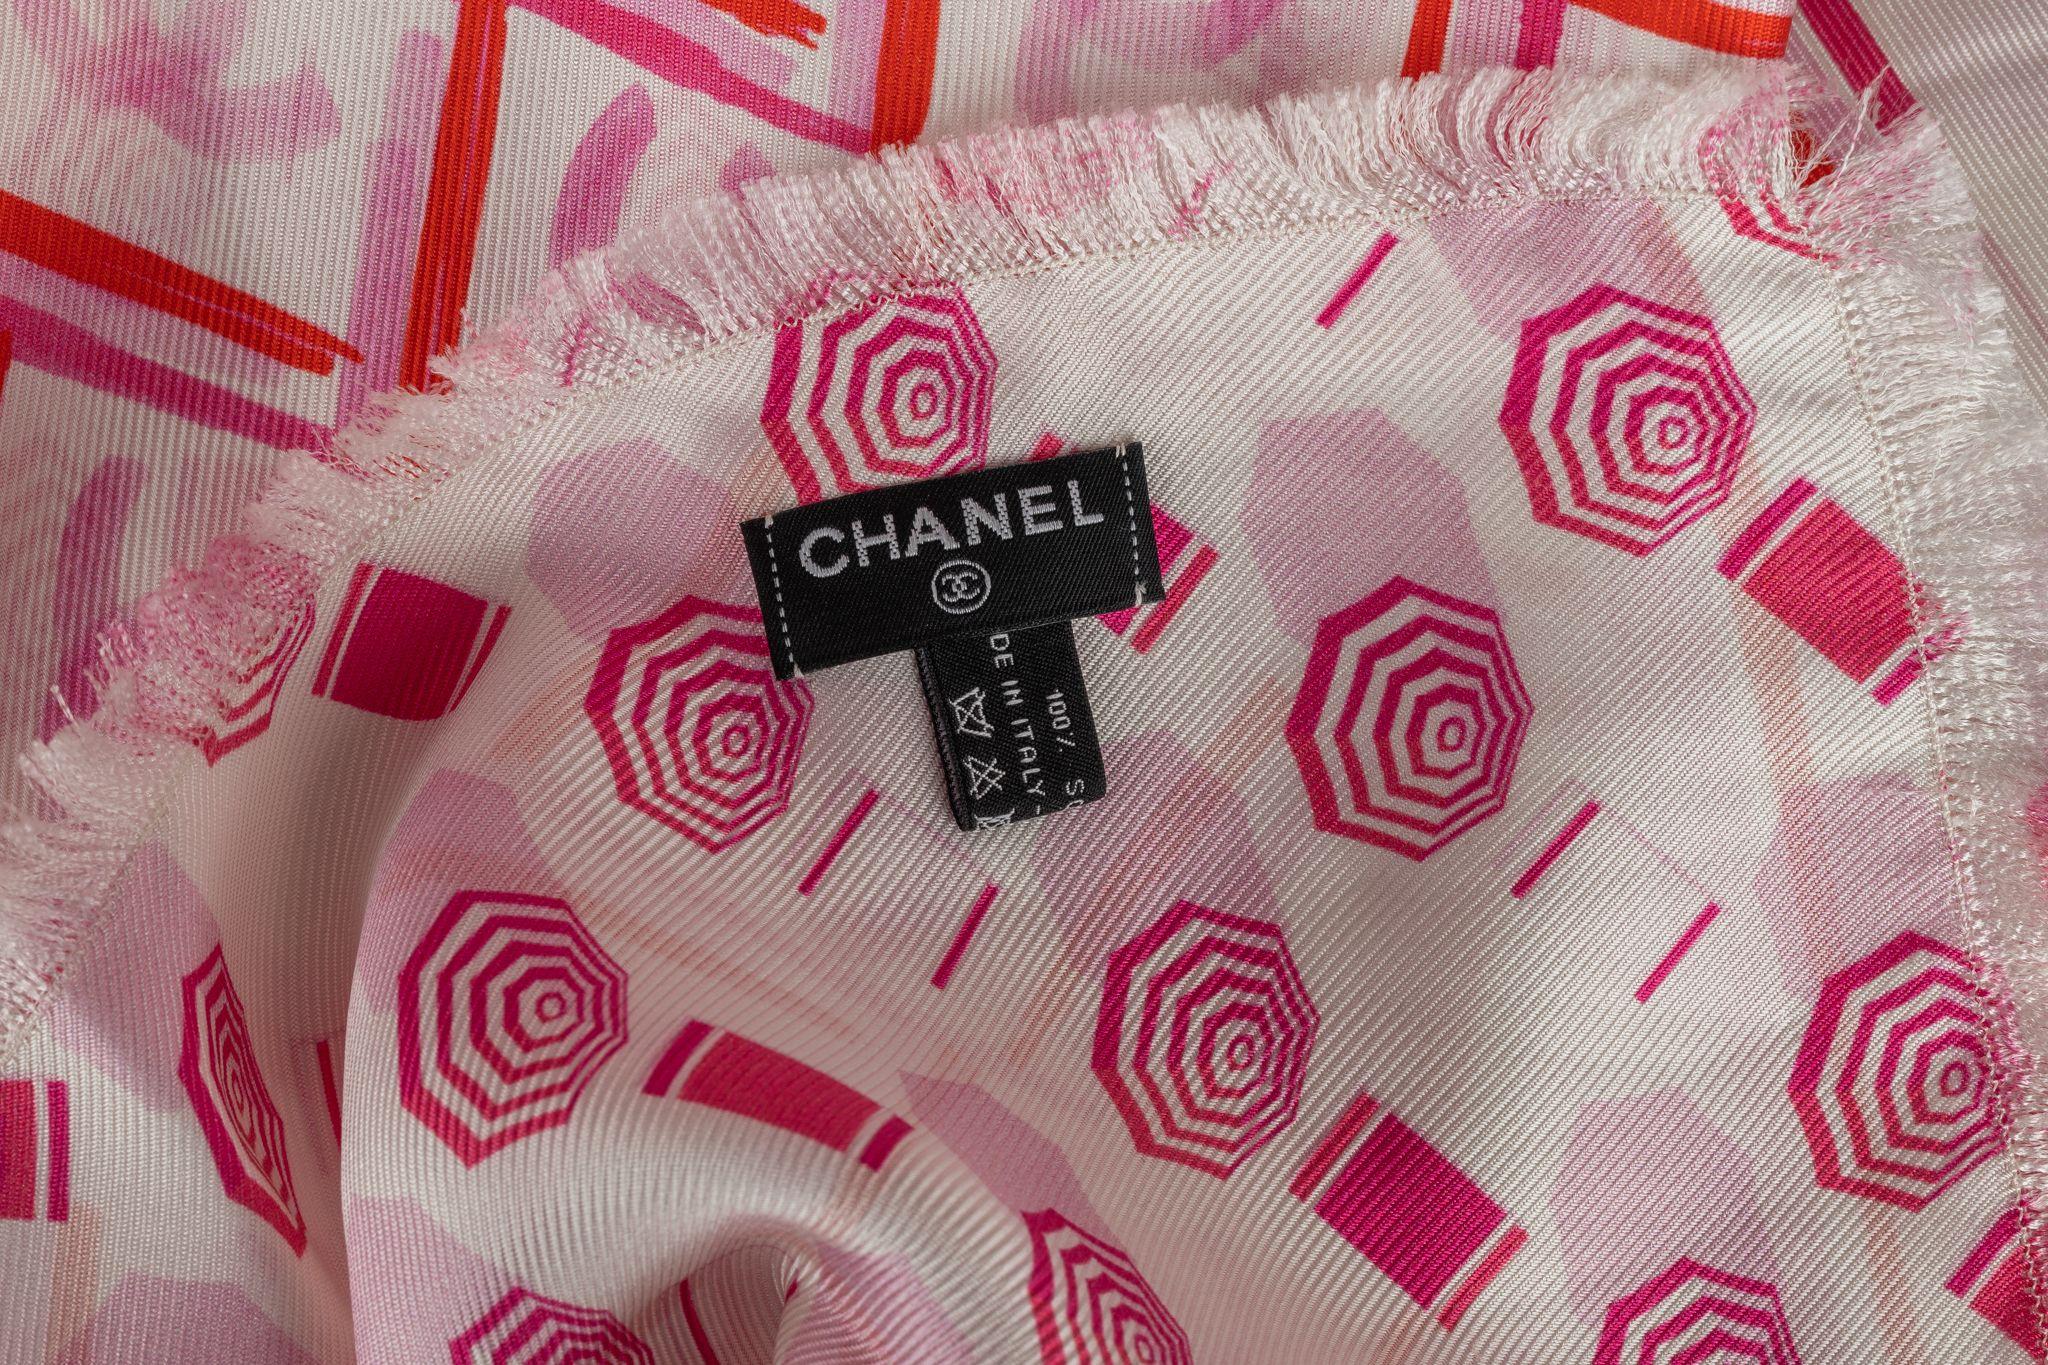 Chanel Silk Shawl in pink and white. The pattern features a geometric design with CC logos and beach umbrellas. The item is in excellent condition.